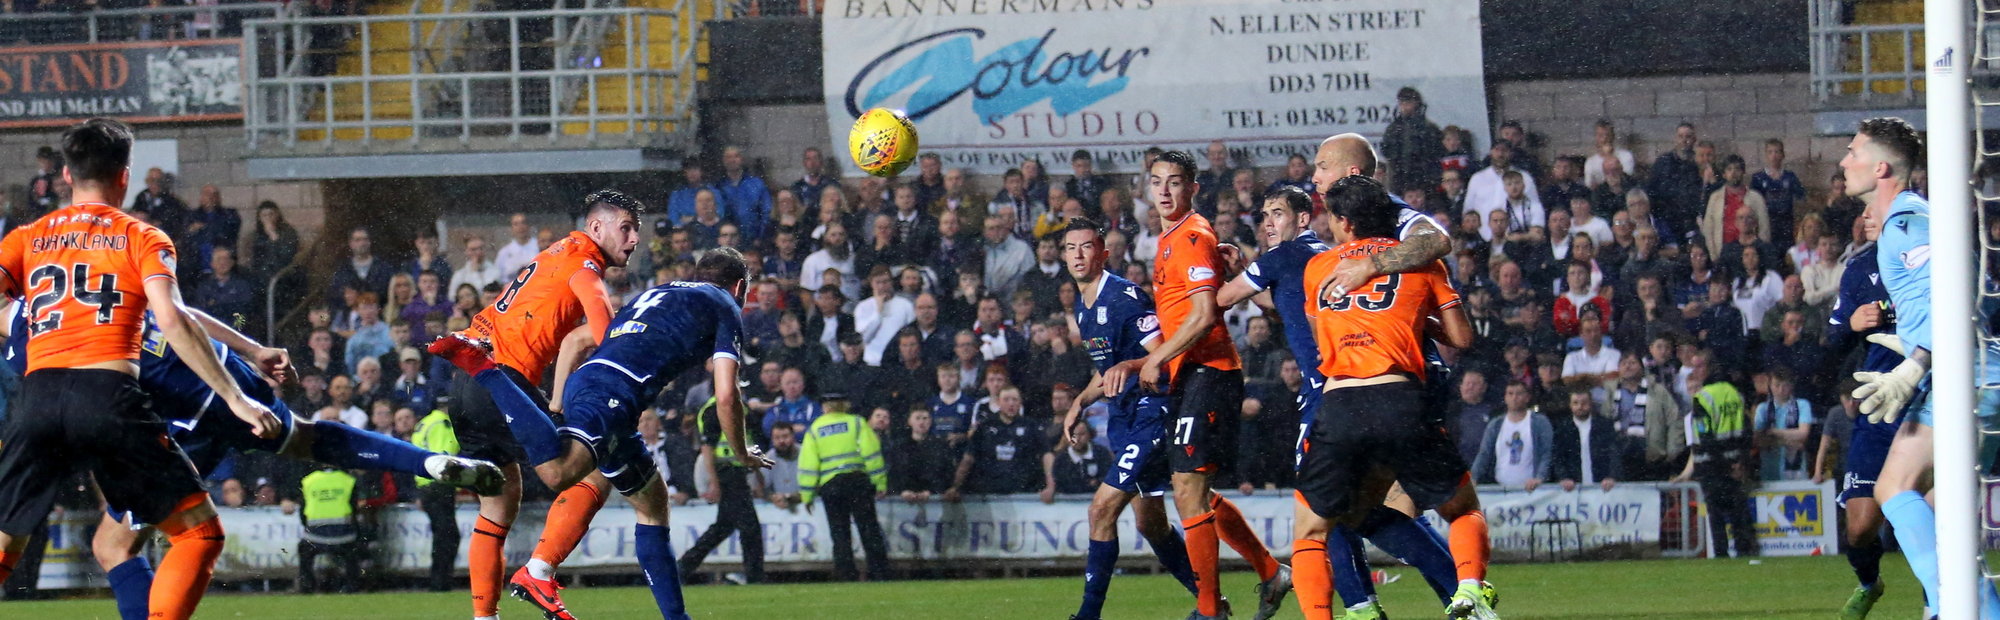 butcher scores against dundee